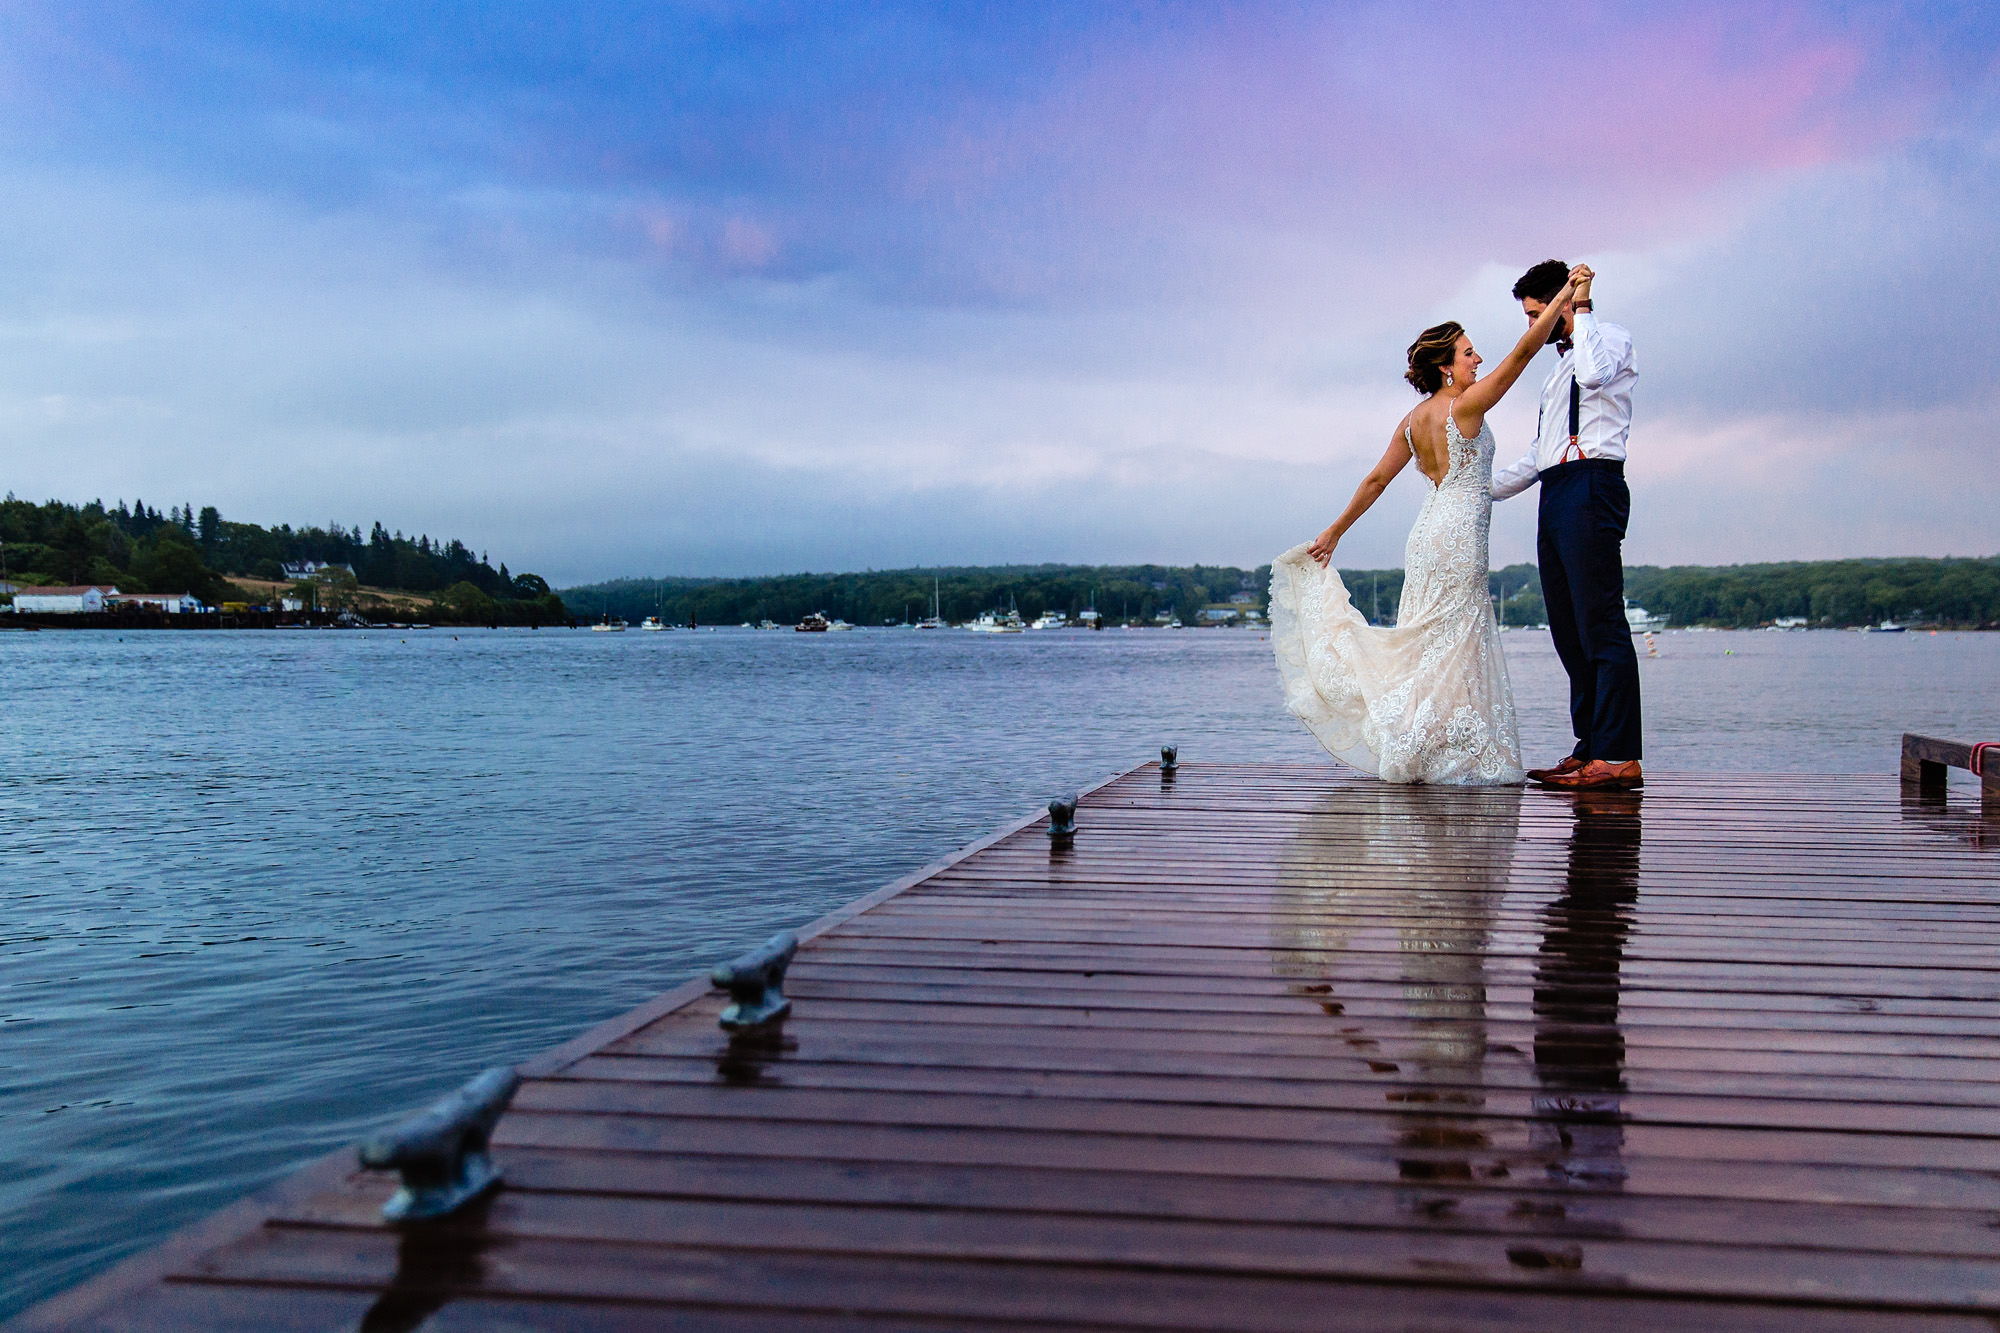 A wedding portrait at The Contented Sole in New Harbor, Maine